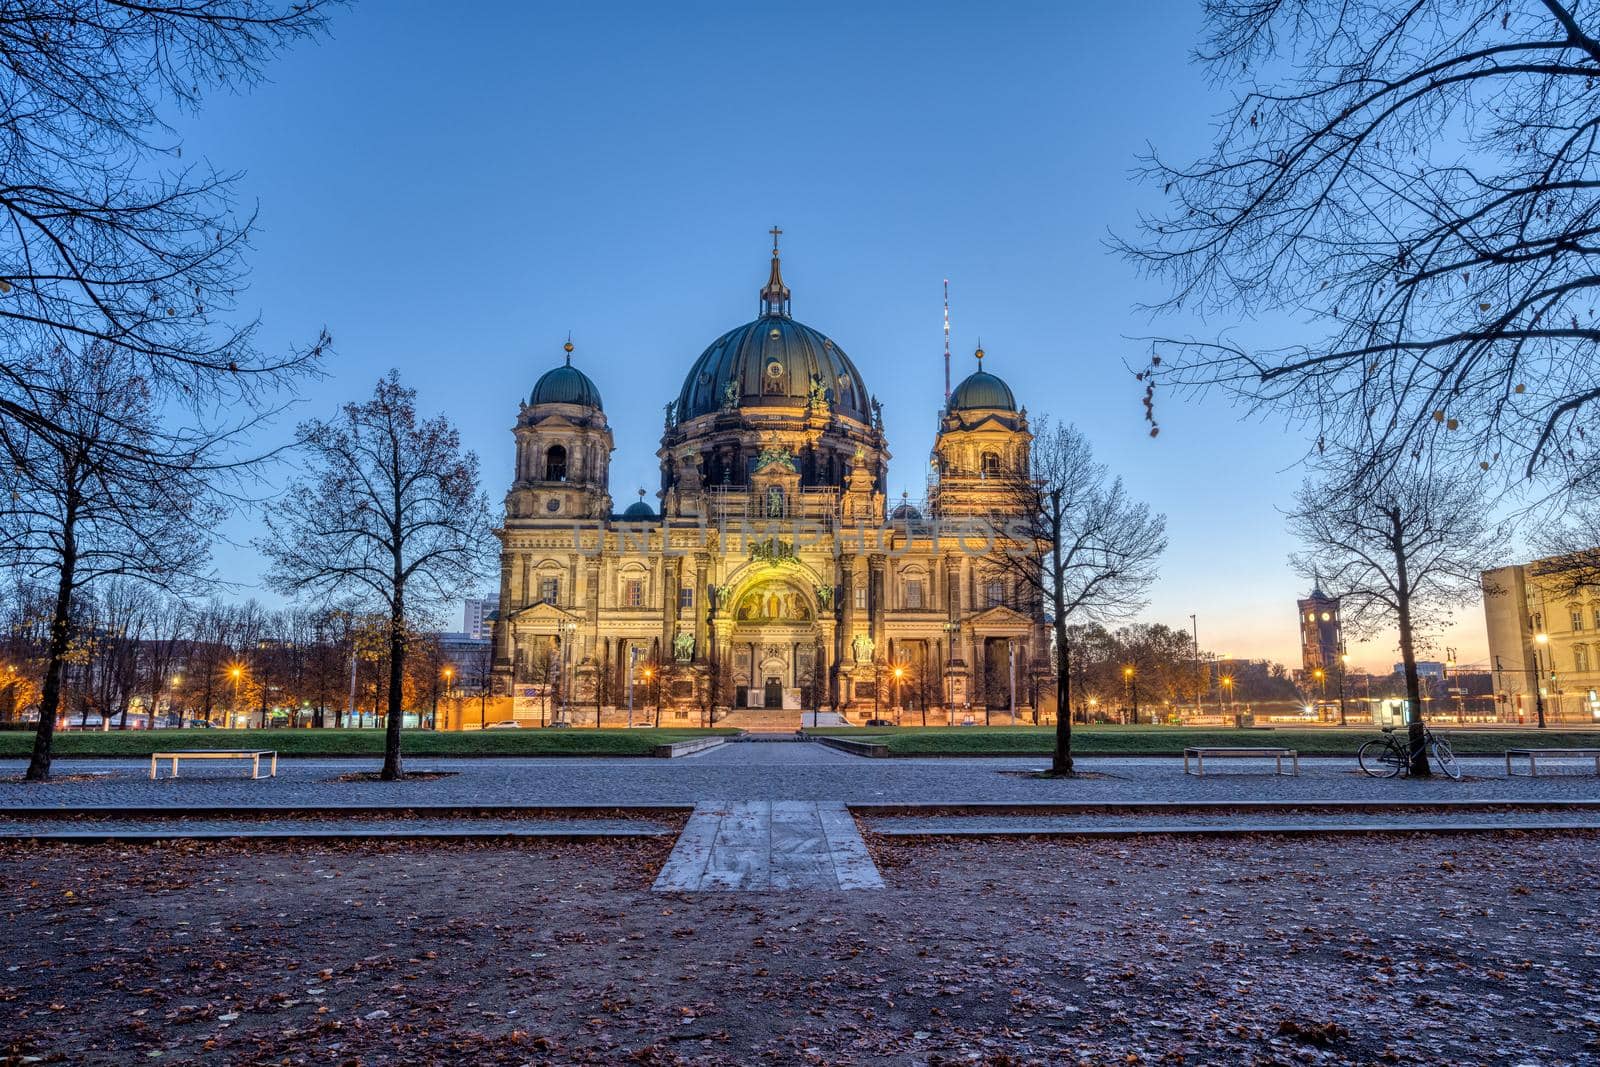 The illuminated Berlin Cathedral in autumn with some barren trees by elxeneize